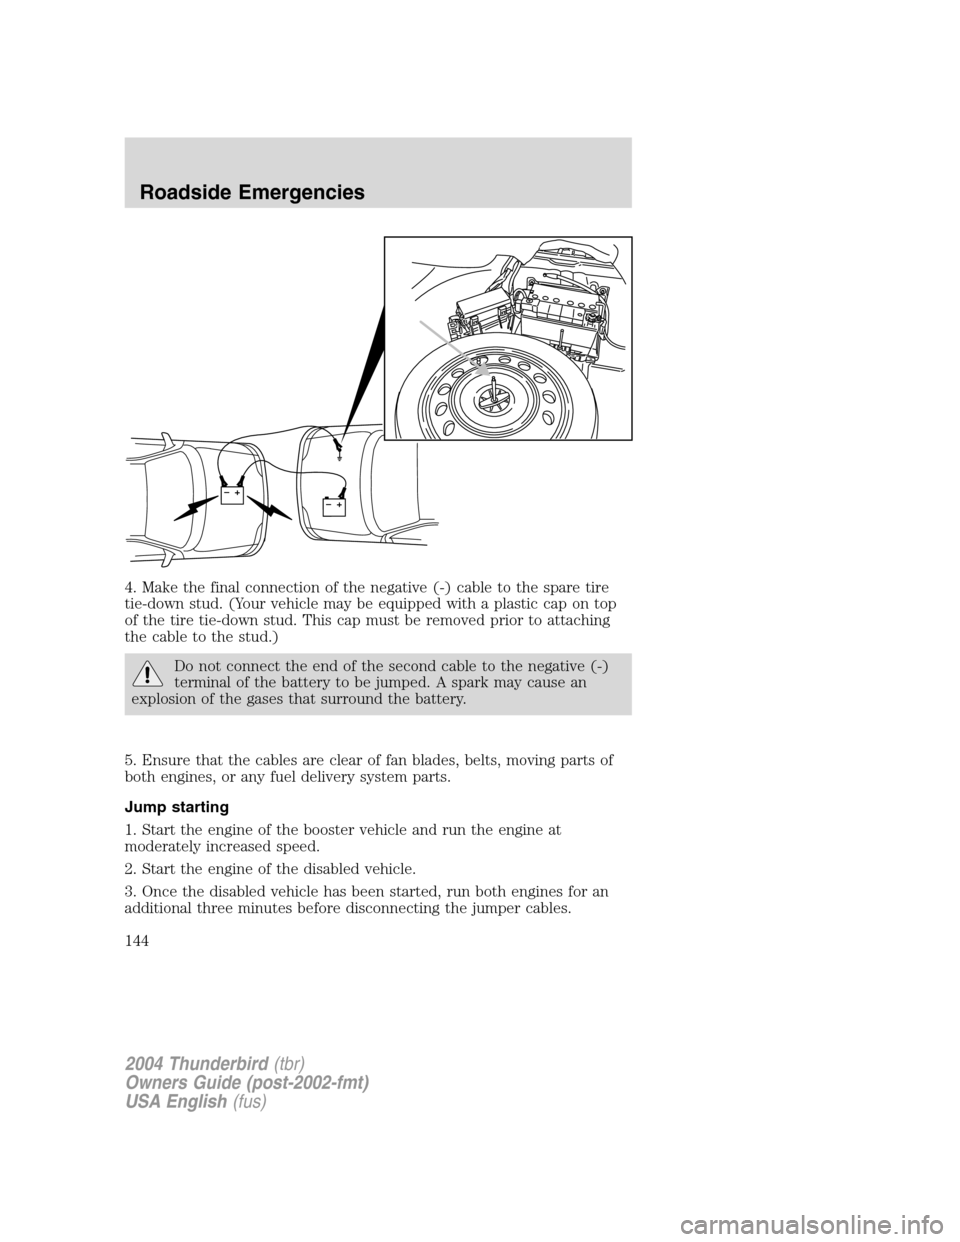 FORD THUNDERBIRD 2004 11.G Owners Manual 4. Make the final connection of the negative (-) cable to the spare tire
tie-down stud. (Your vehicle may be equipped with a plastic cap on top
of the tire tie-down stud. This cap must be removed prio